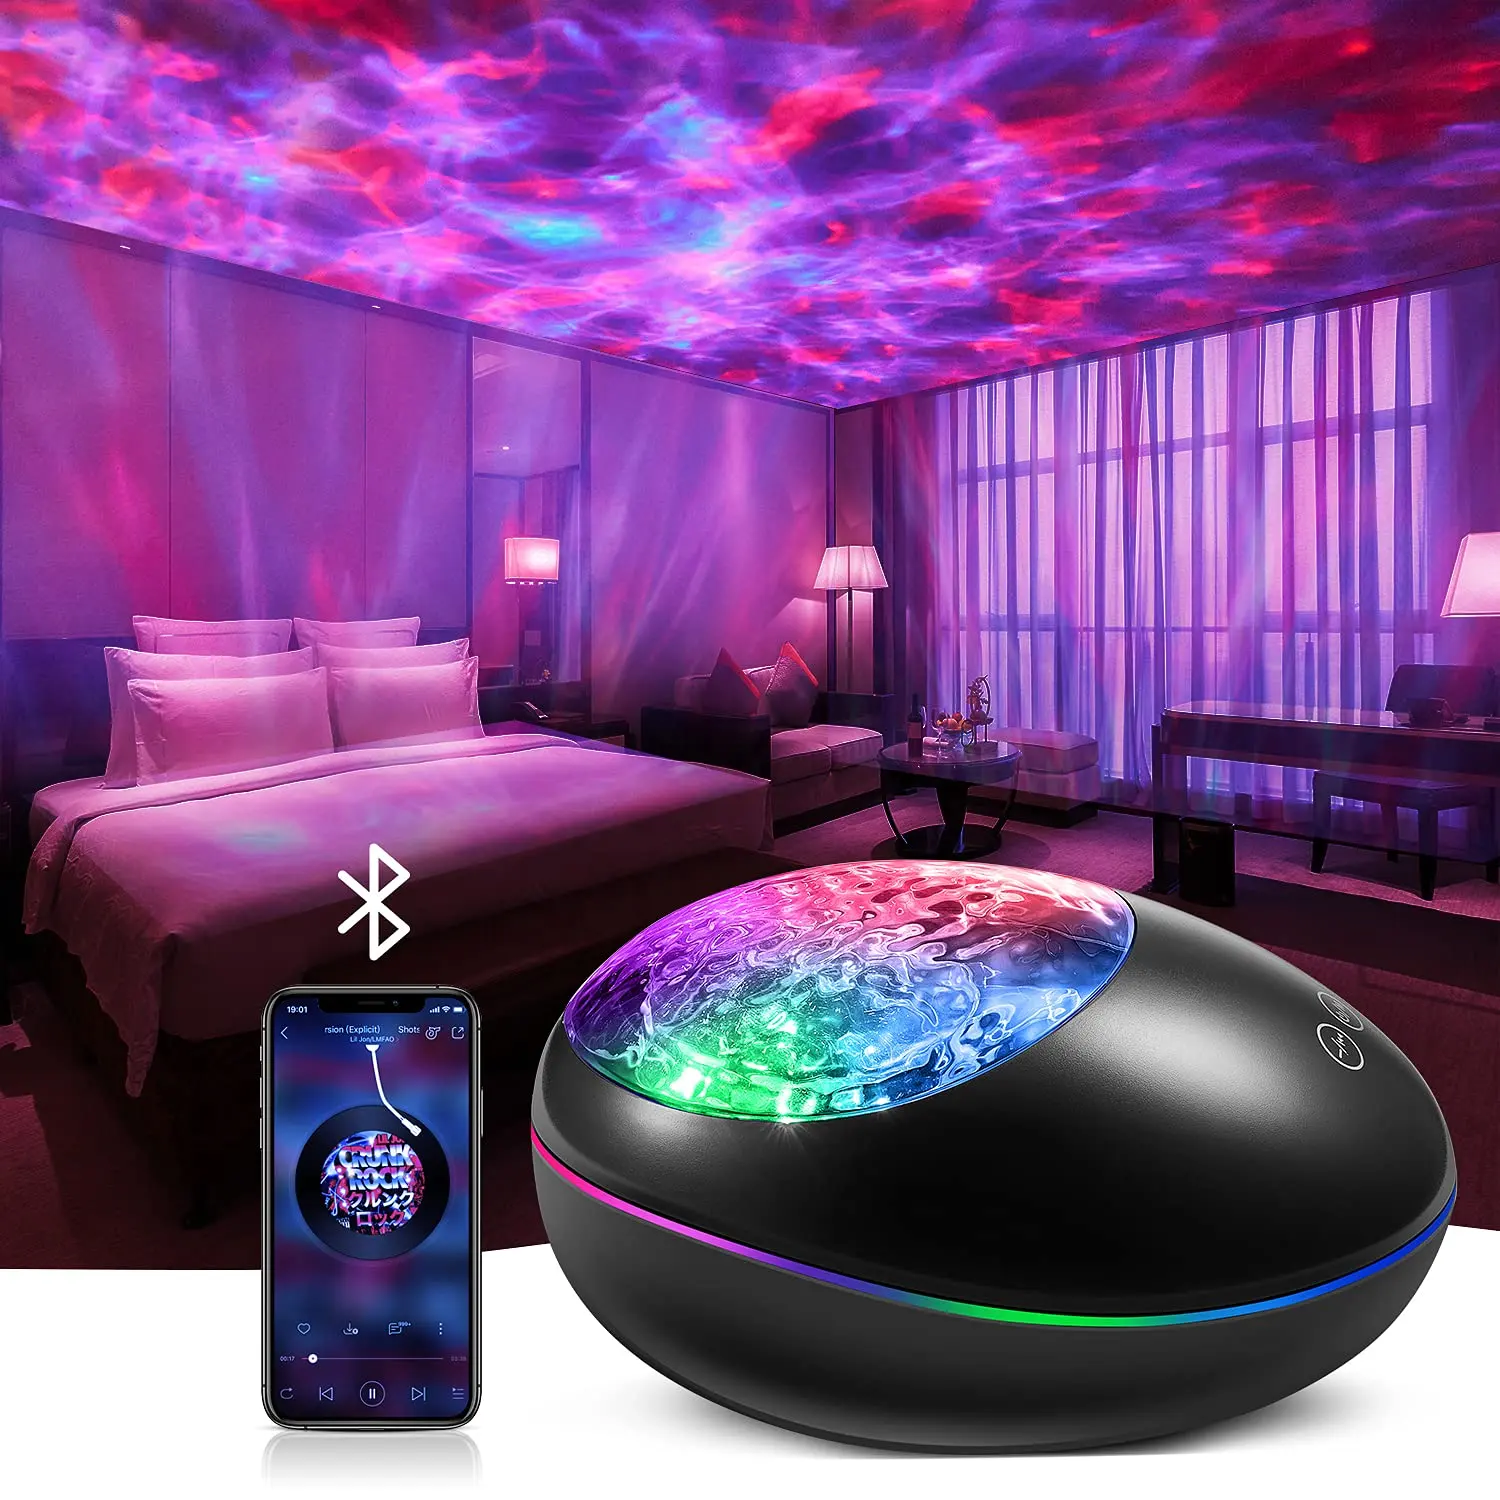 Galaxy Projector Room Party Home Epicgadget Laser Star Projector Ocean Wave Night Light Projection With Bluet